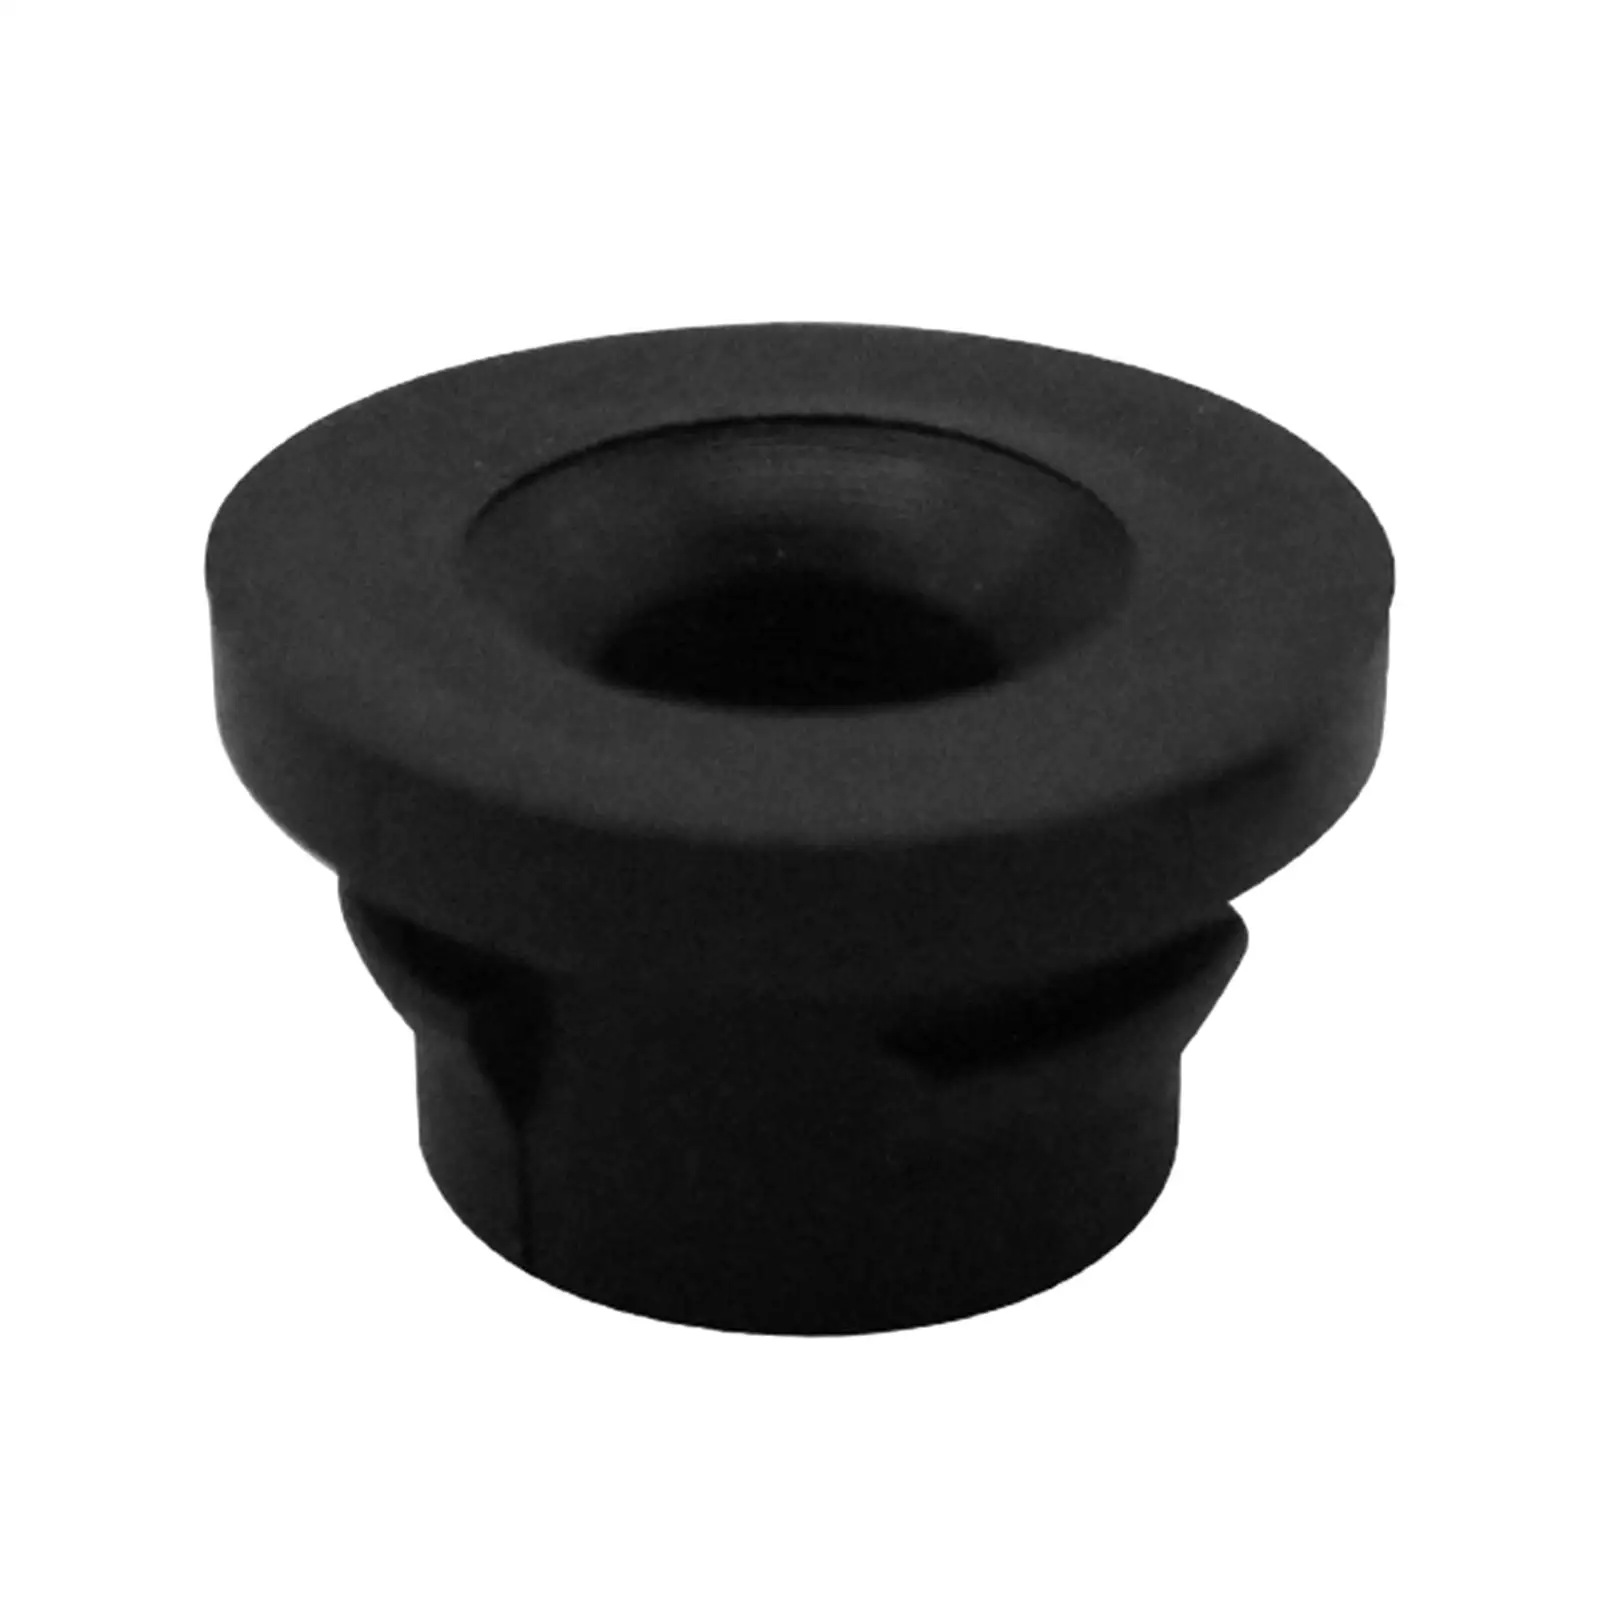 Automotive Air Filter Rubber Insert, Accessories 1422A3 1422.A3 Fit for Citroen 1.6 Hdi C3 C4, for Peugeot Partner.